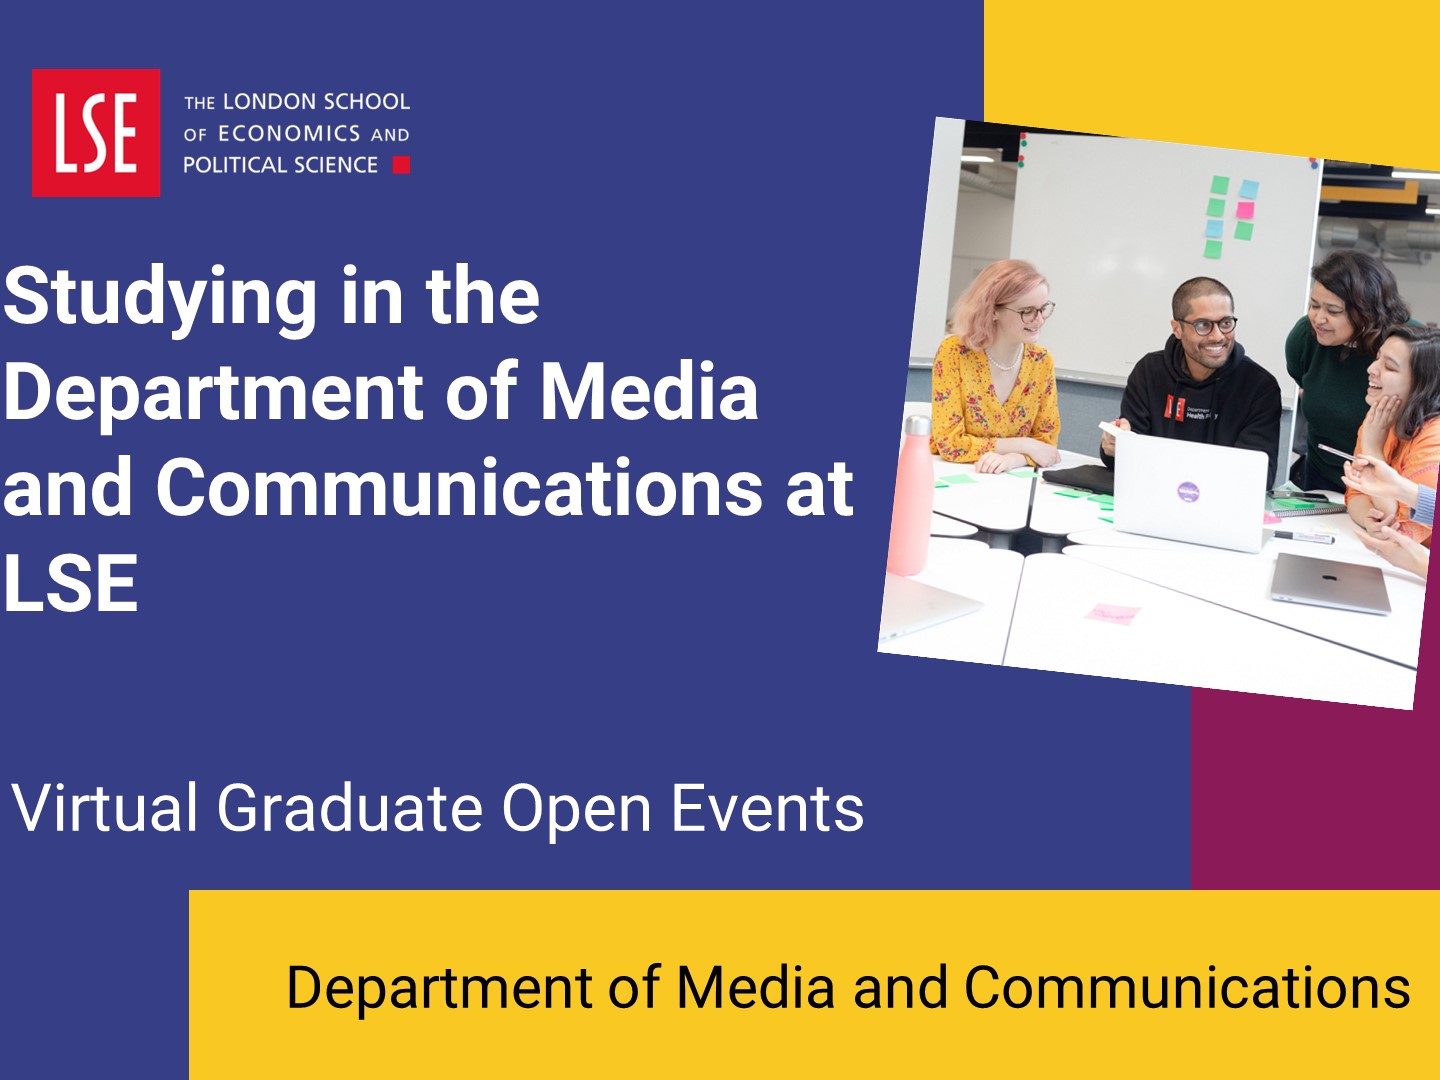 Studying in the Department of Media and Communications at LSE